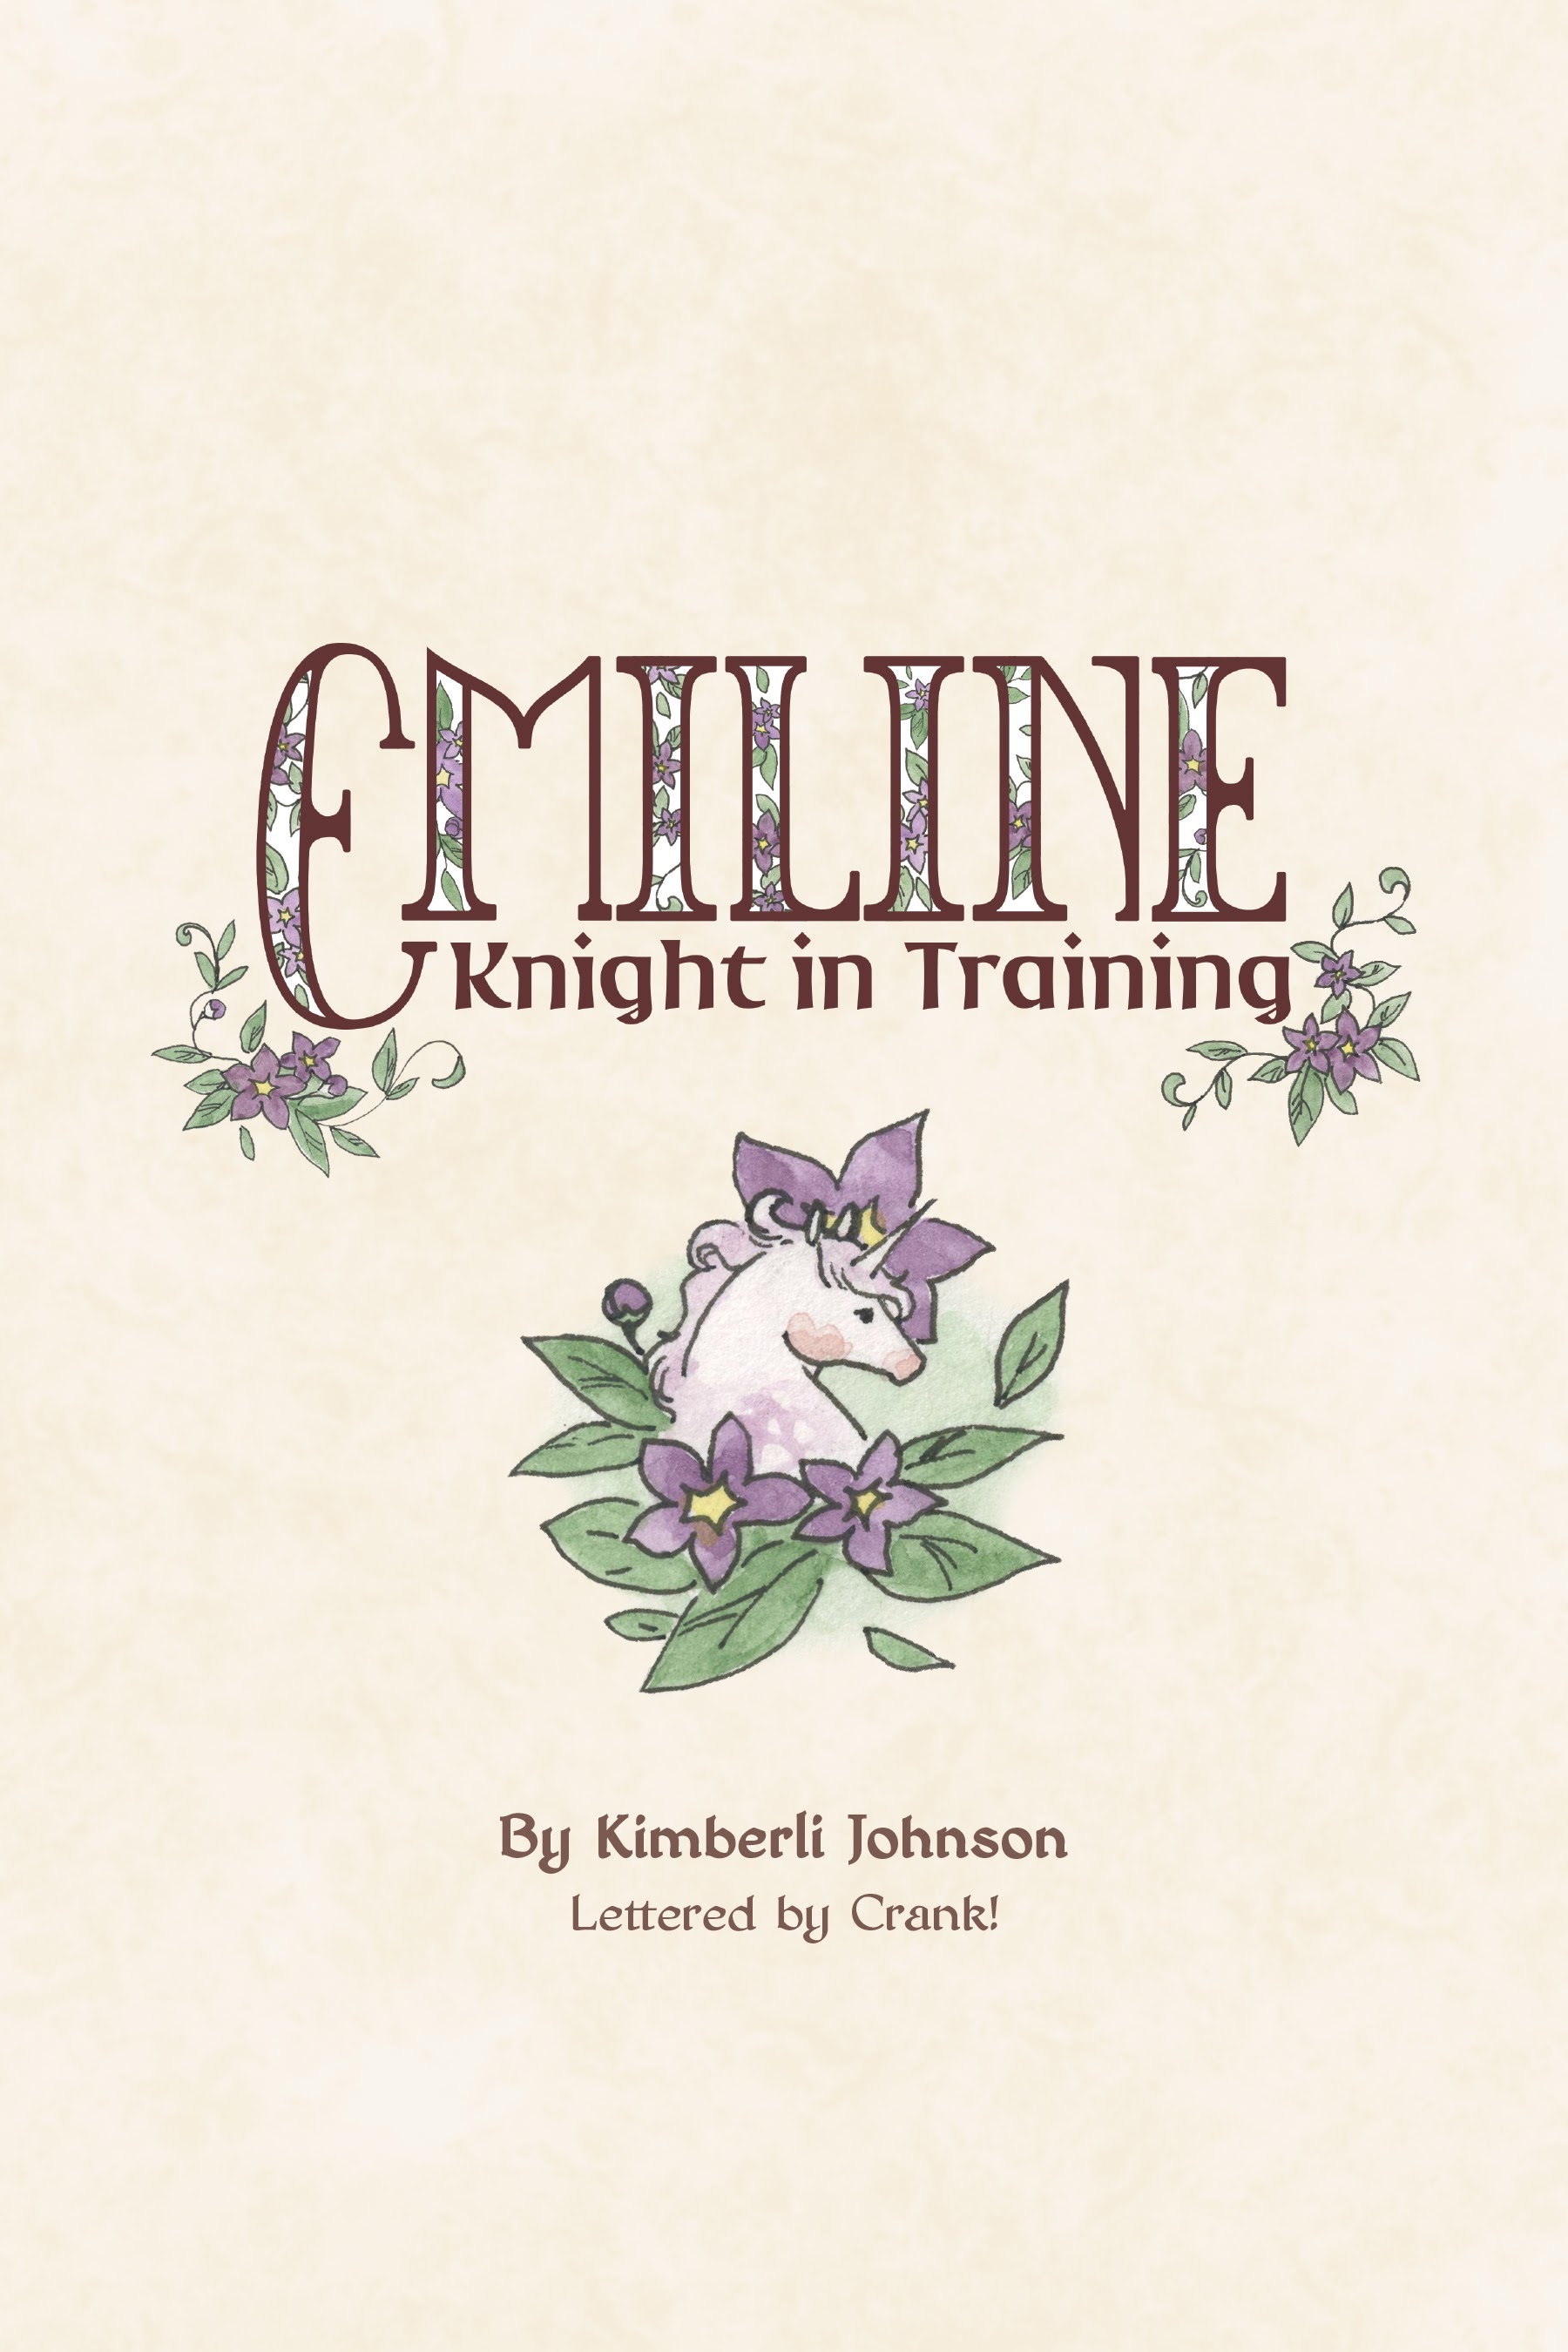 Read online Emiline: Knight in Training comic -  Issue # Full - 4